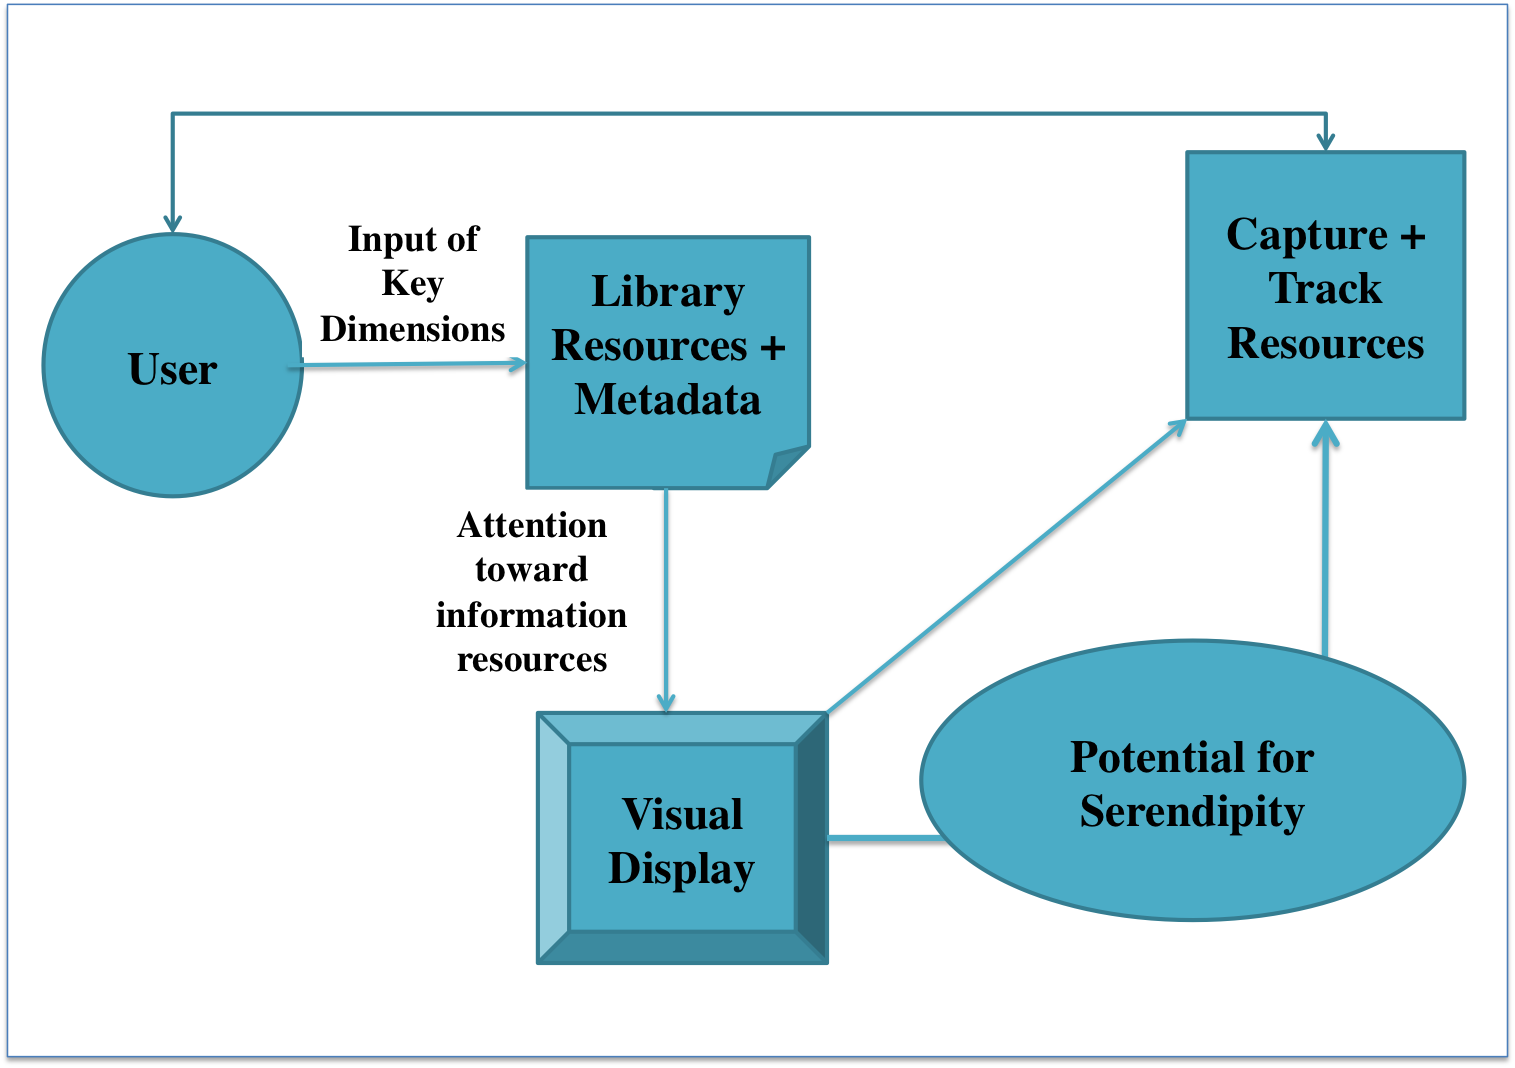 Model for the potential for serendipity in STAK